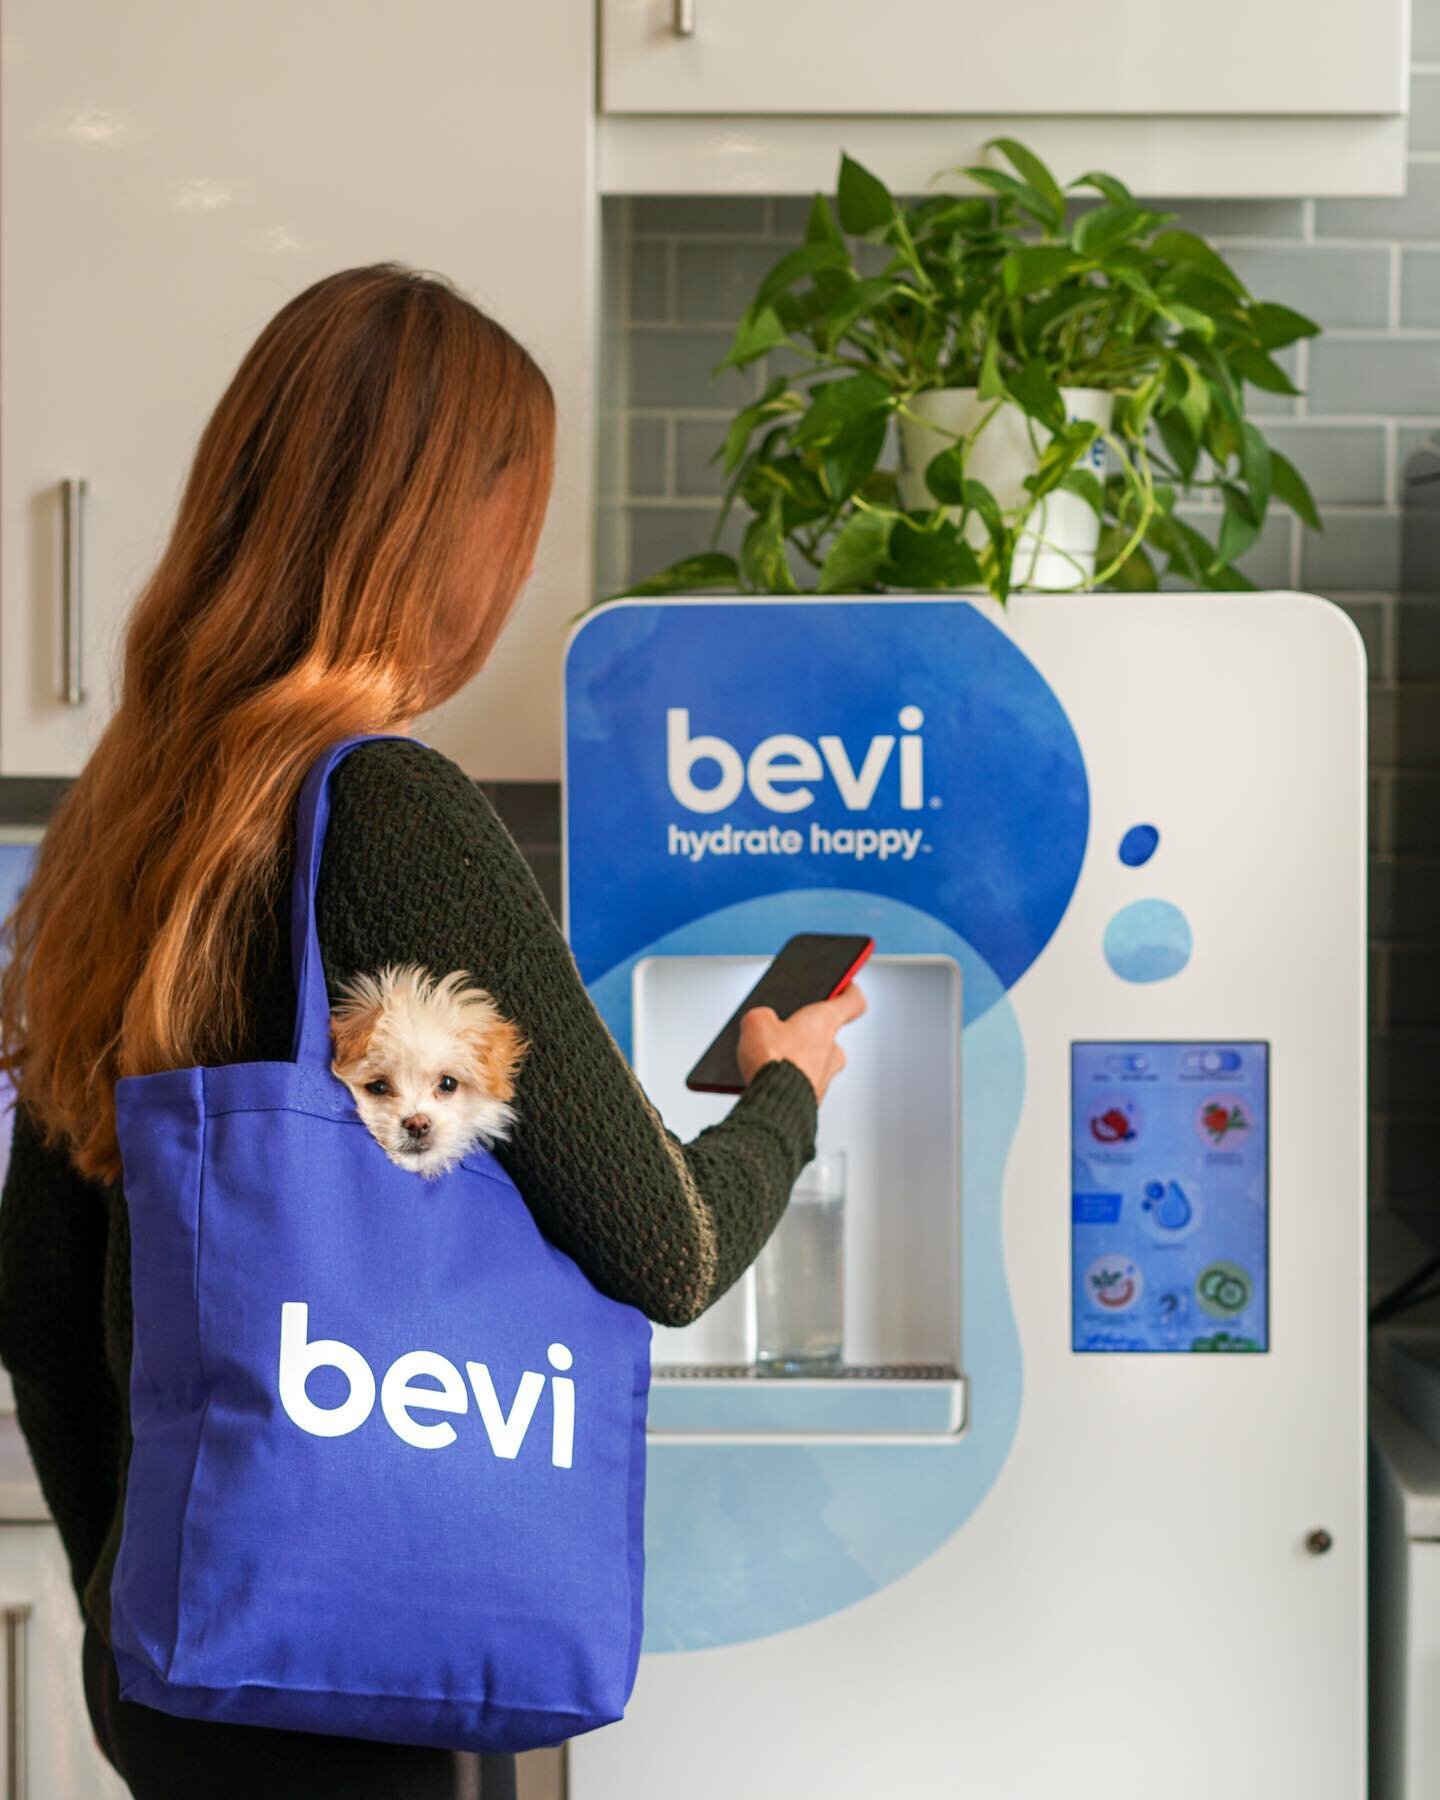 Touchless dispensing a sparkling water with one of my fav coworkers, @heyy.baebae 
🐶 💧 
#bevi